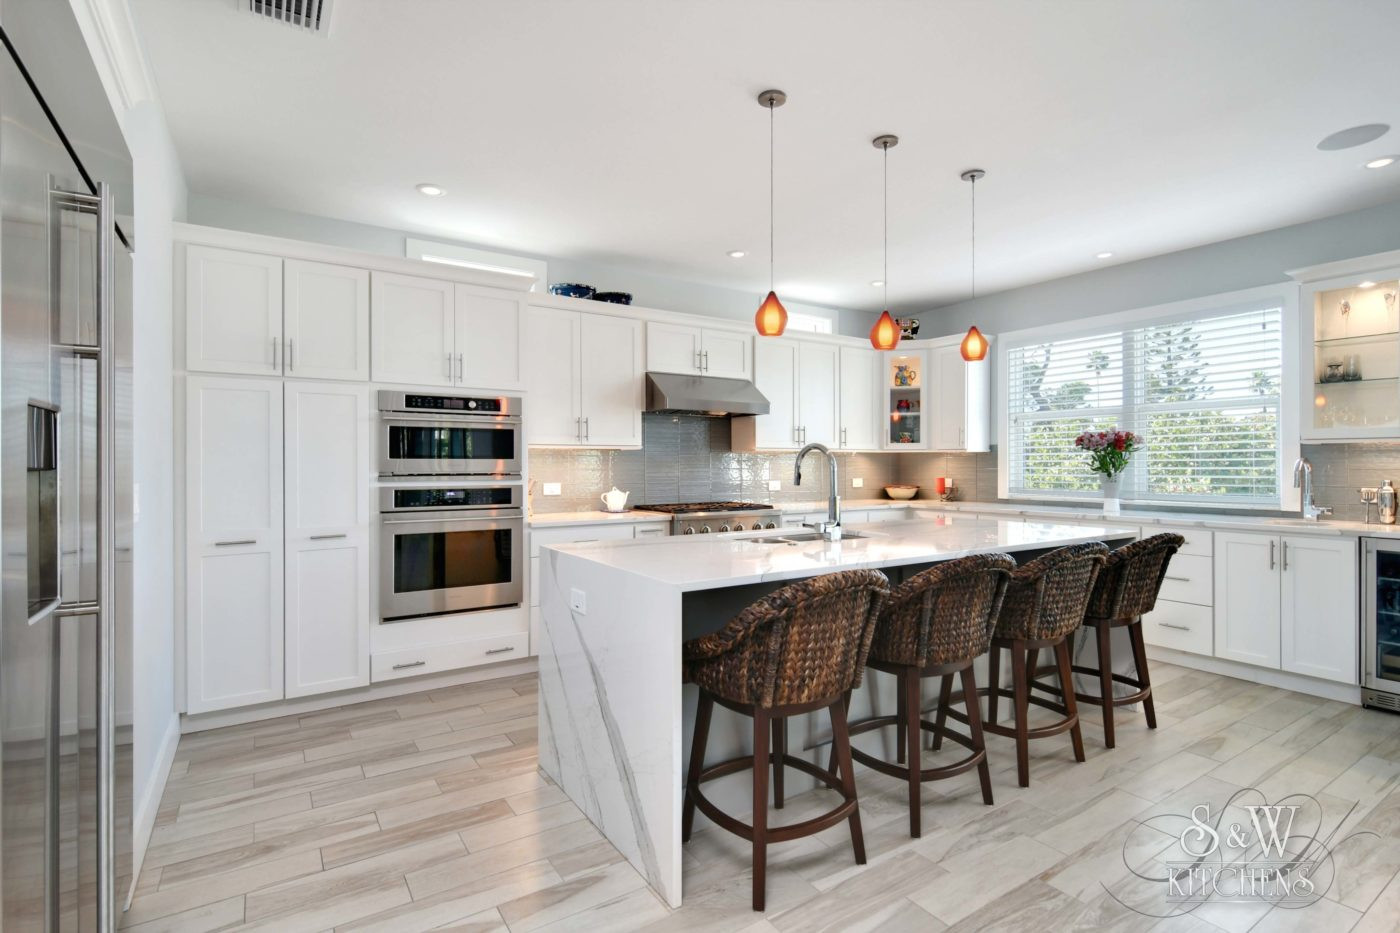 Kitchen And Bath Remodeling Contractors
 The Best Kitchen Remodeling Contractors in Tampa Home